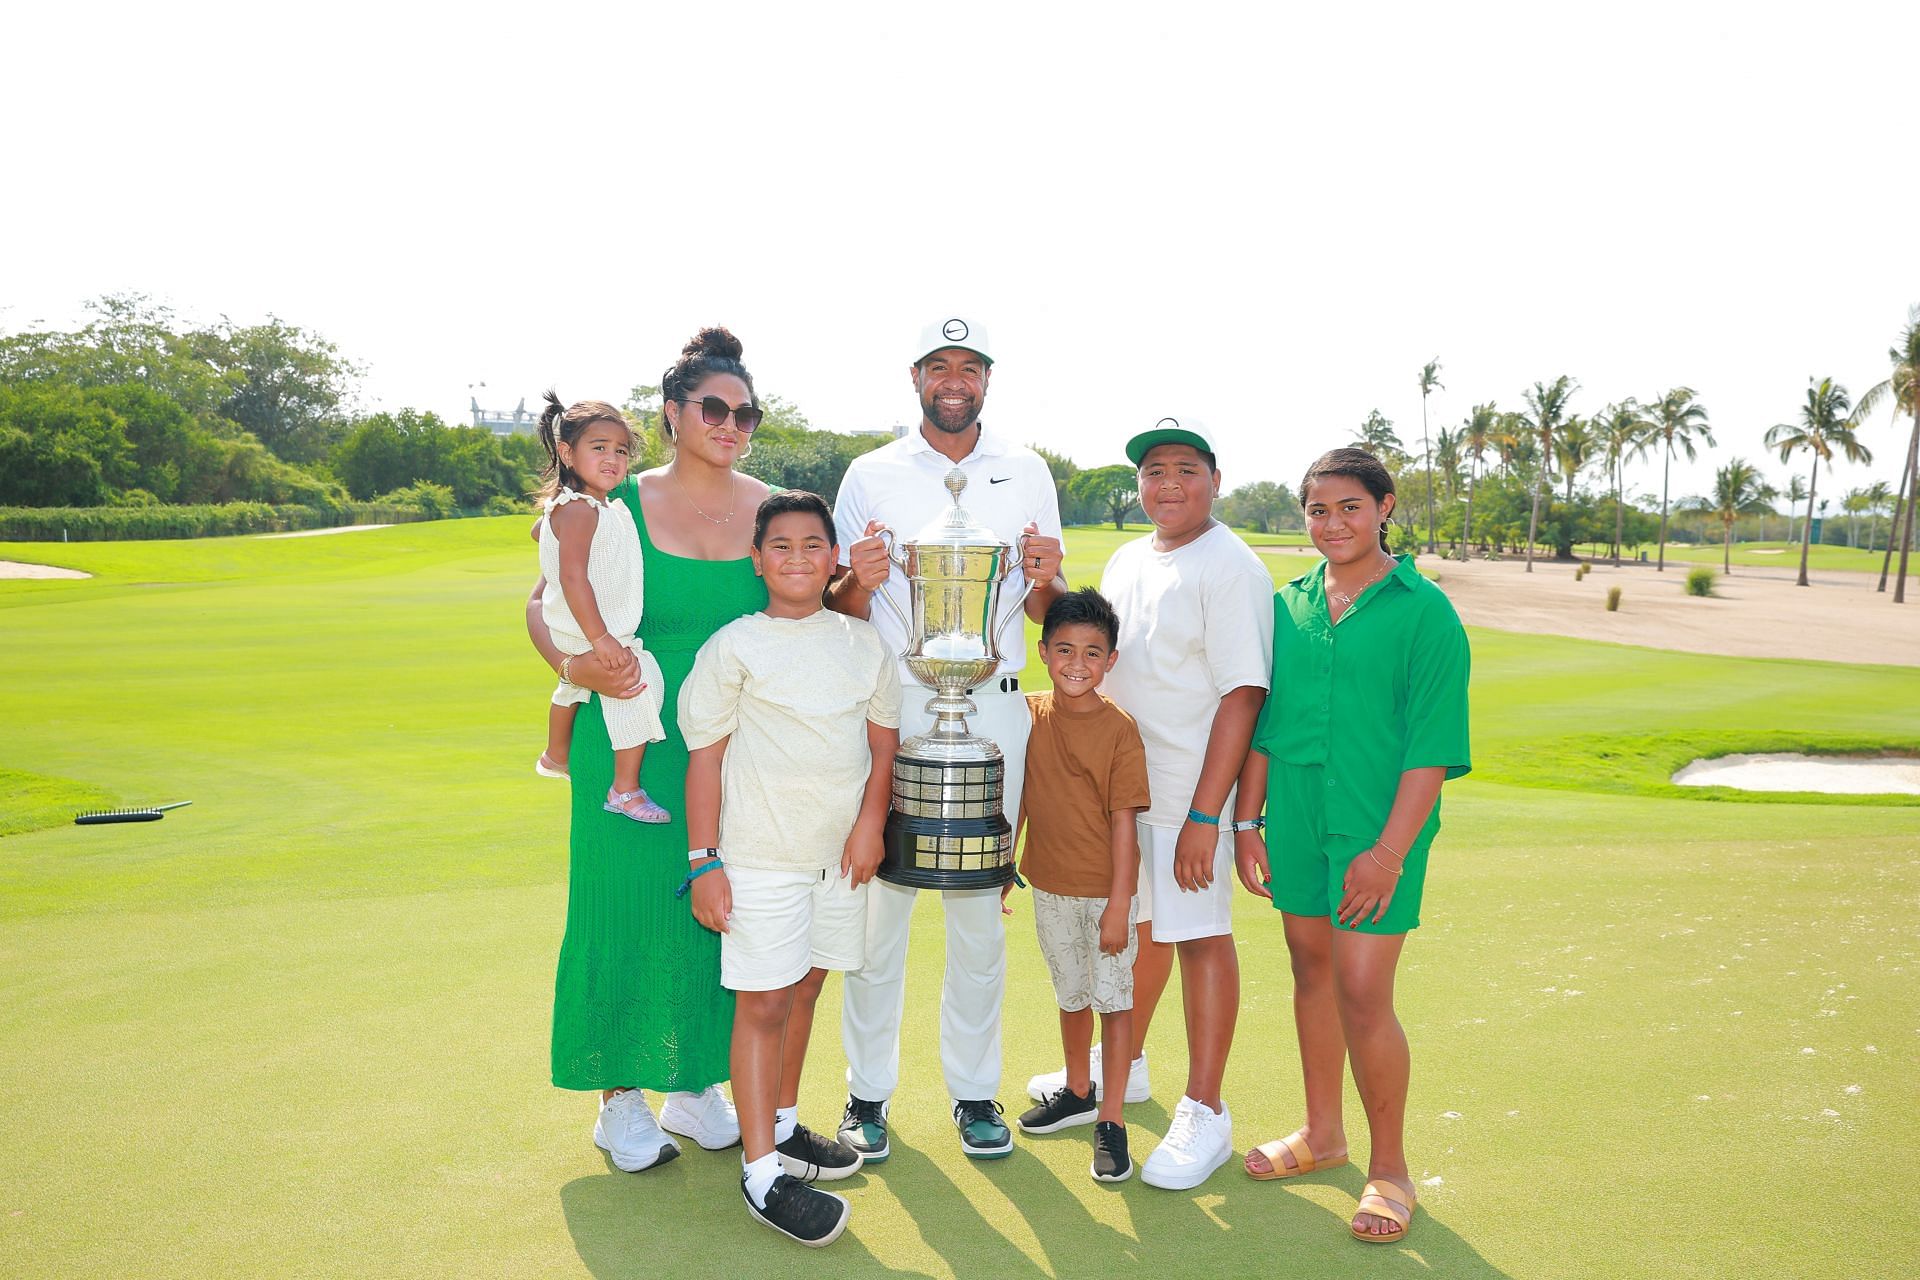 Tony Finau poses with his family after winning the Mexico Open at Vidanta